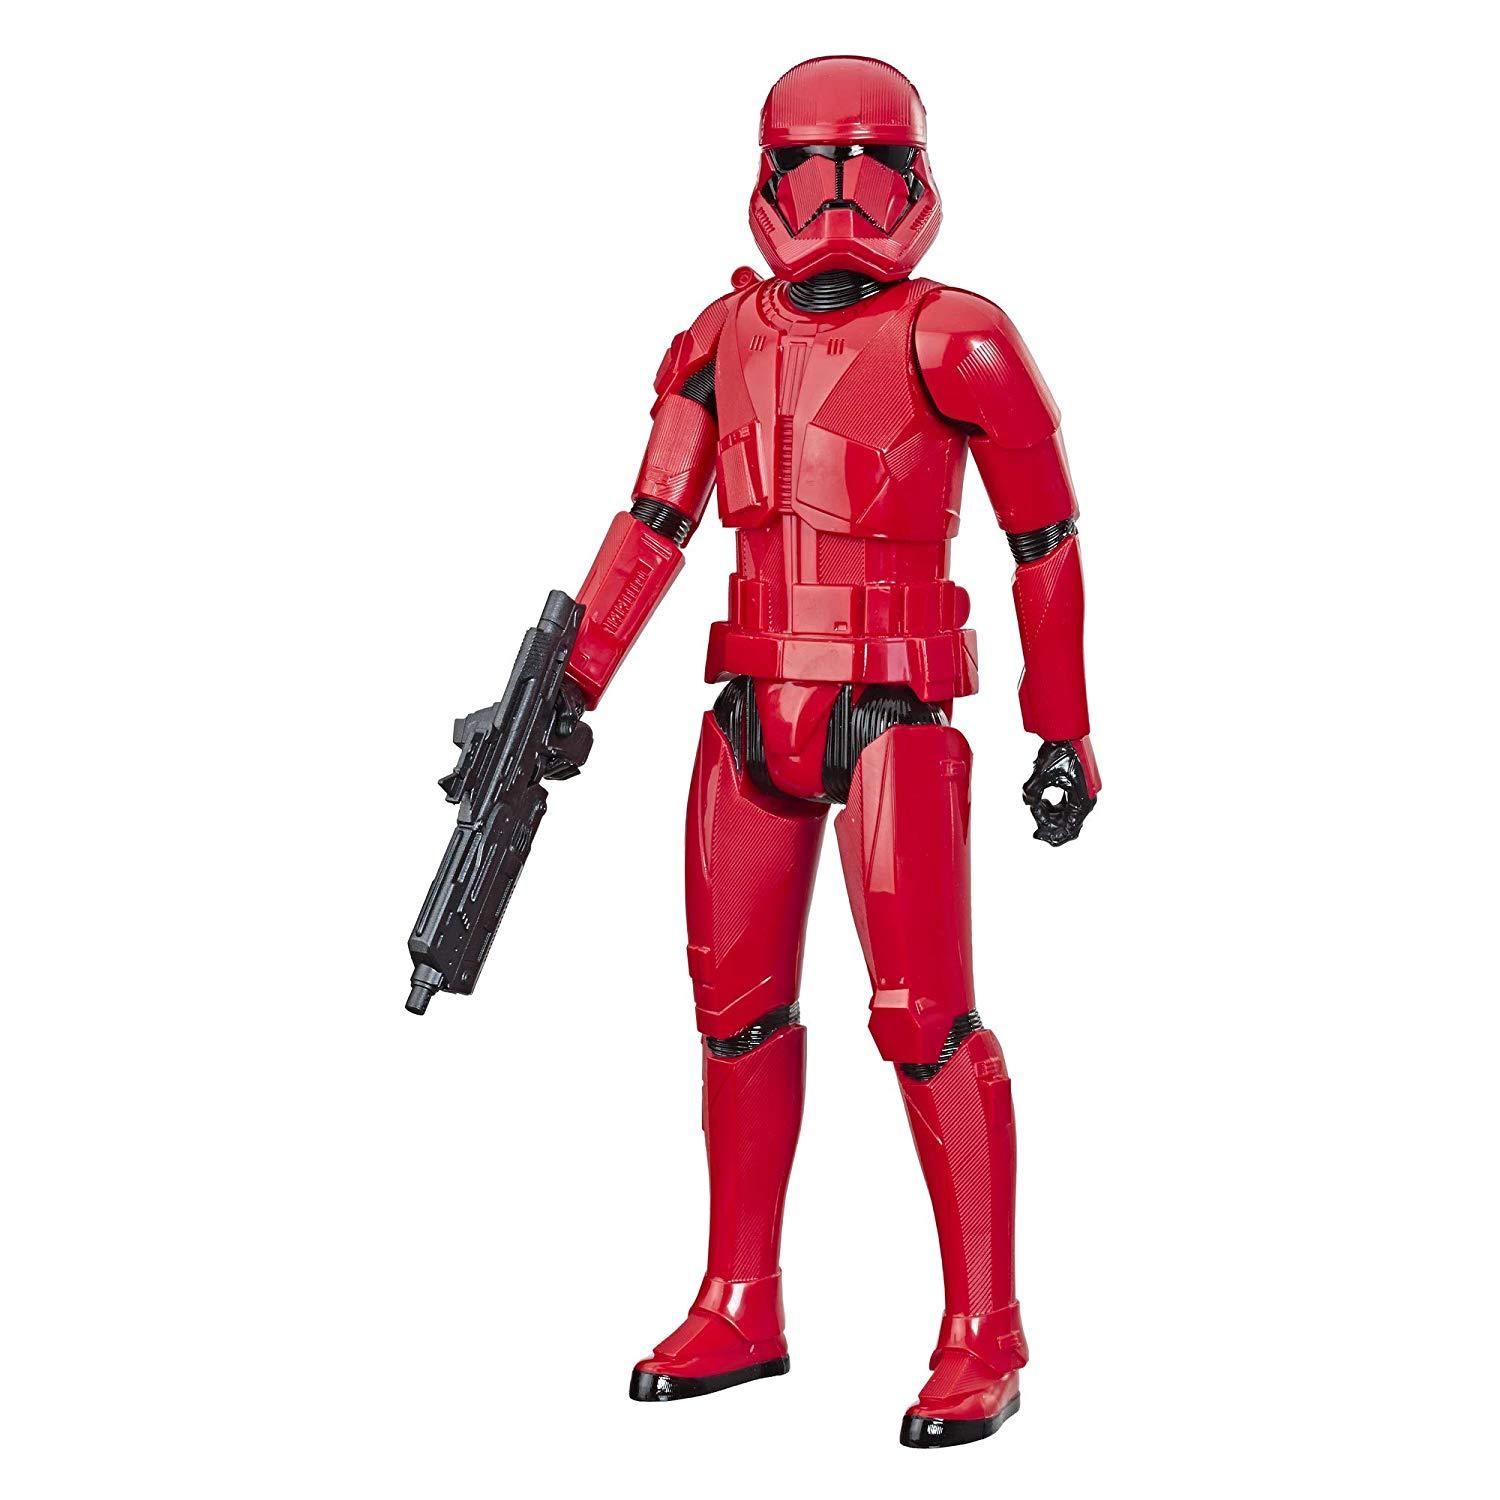 Star Wars Hero Series The Rise of Skywalker Sith Trooper Toy 12 Scale Action Figure, Toys for Kids Ages 4 & Up